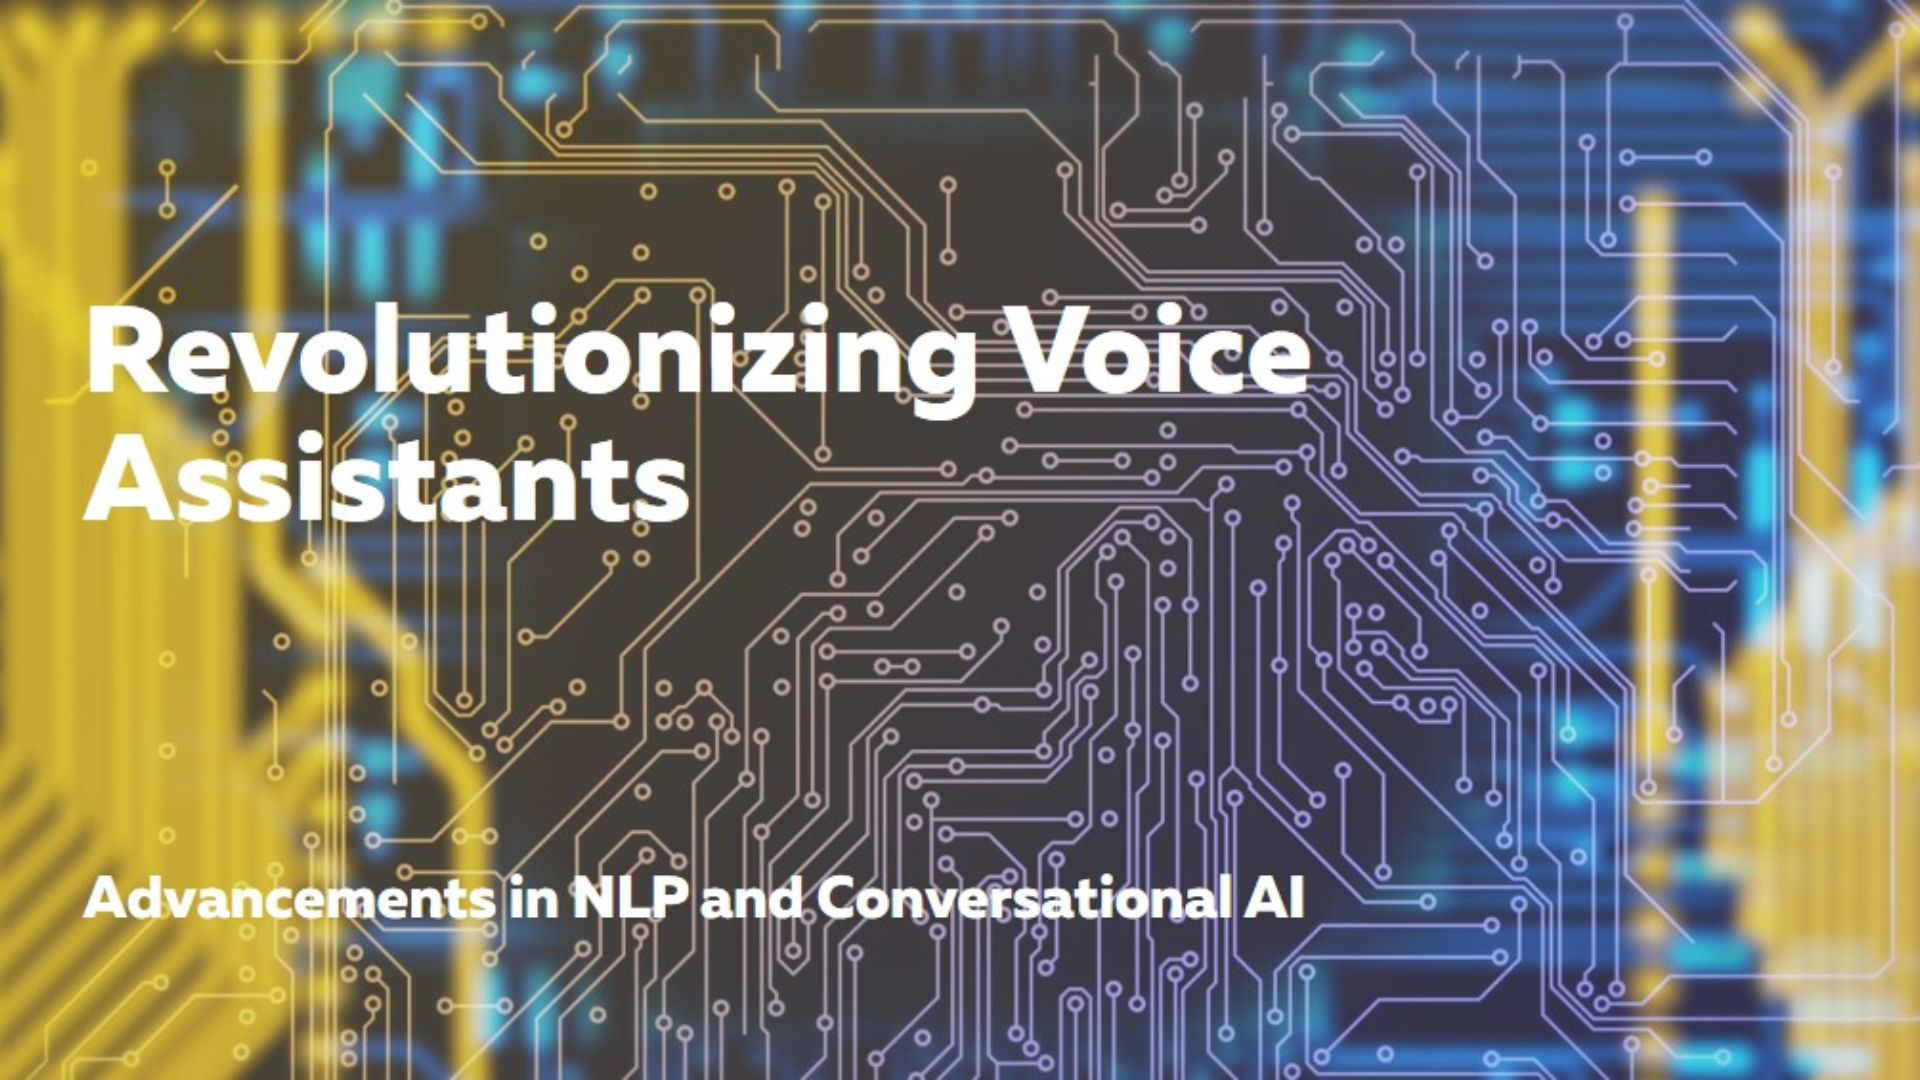 Voice Assistant Evolution: Advancements in Natural Language Processing and Conversational AI